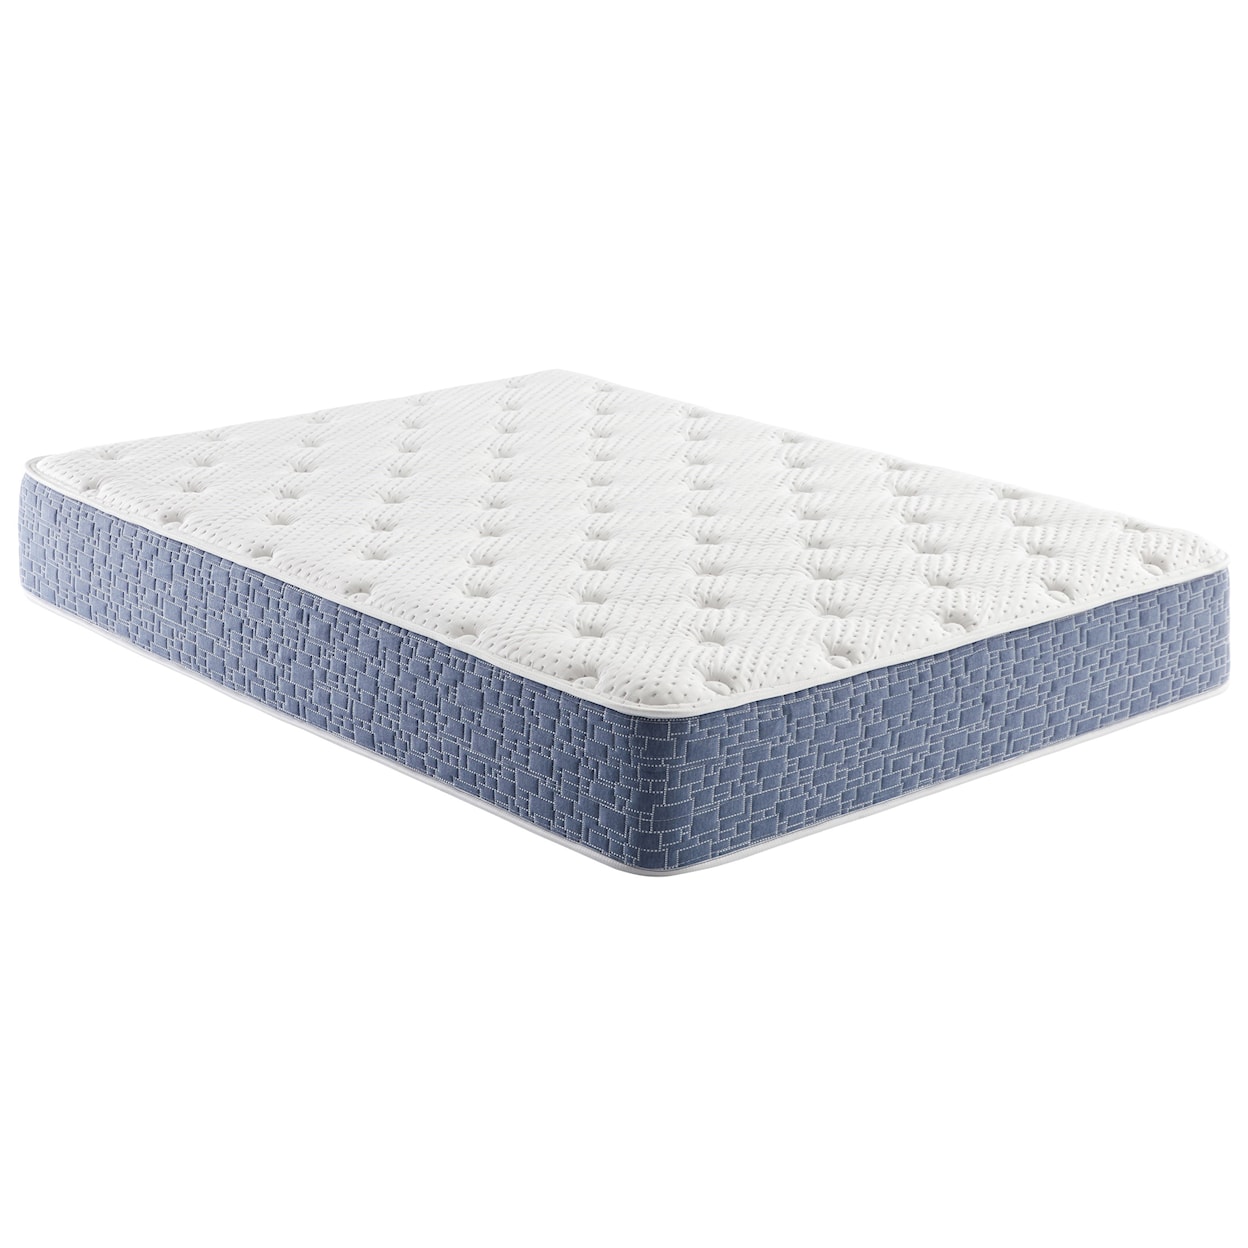 Corsicana ABR20511 Twin 11" Firm Hybrid Bed-In-A-Box Mattress